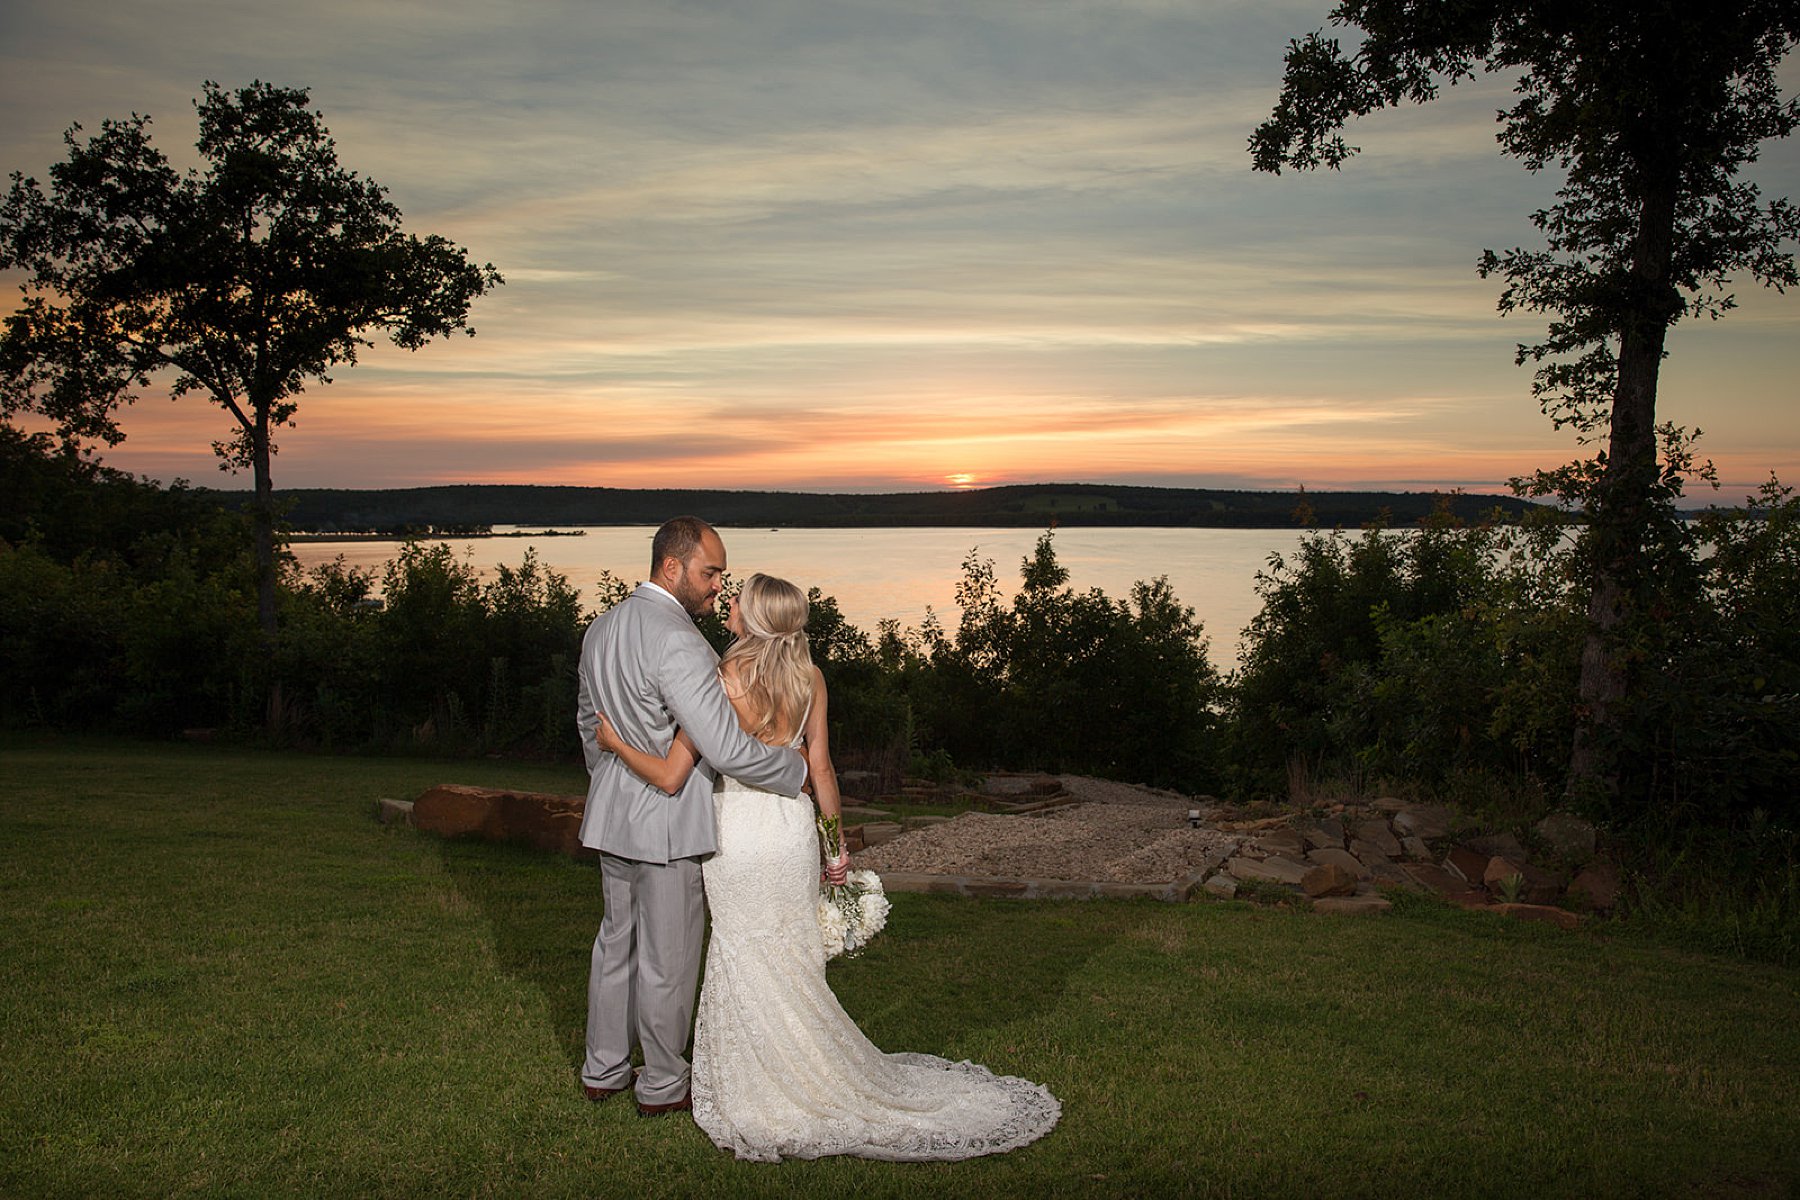 Bride and groom looking at each other in front of lake sunset at The Springs wedding event center